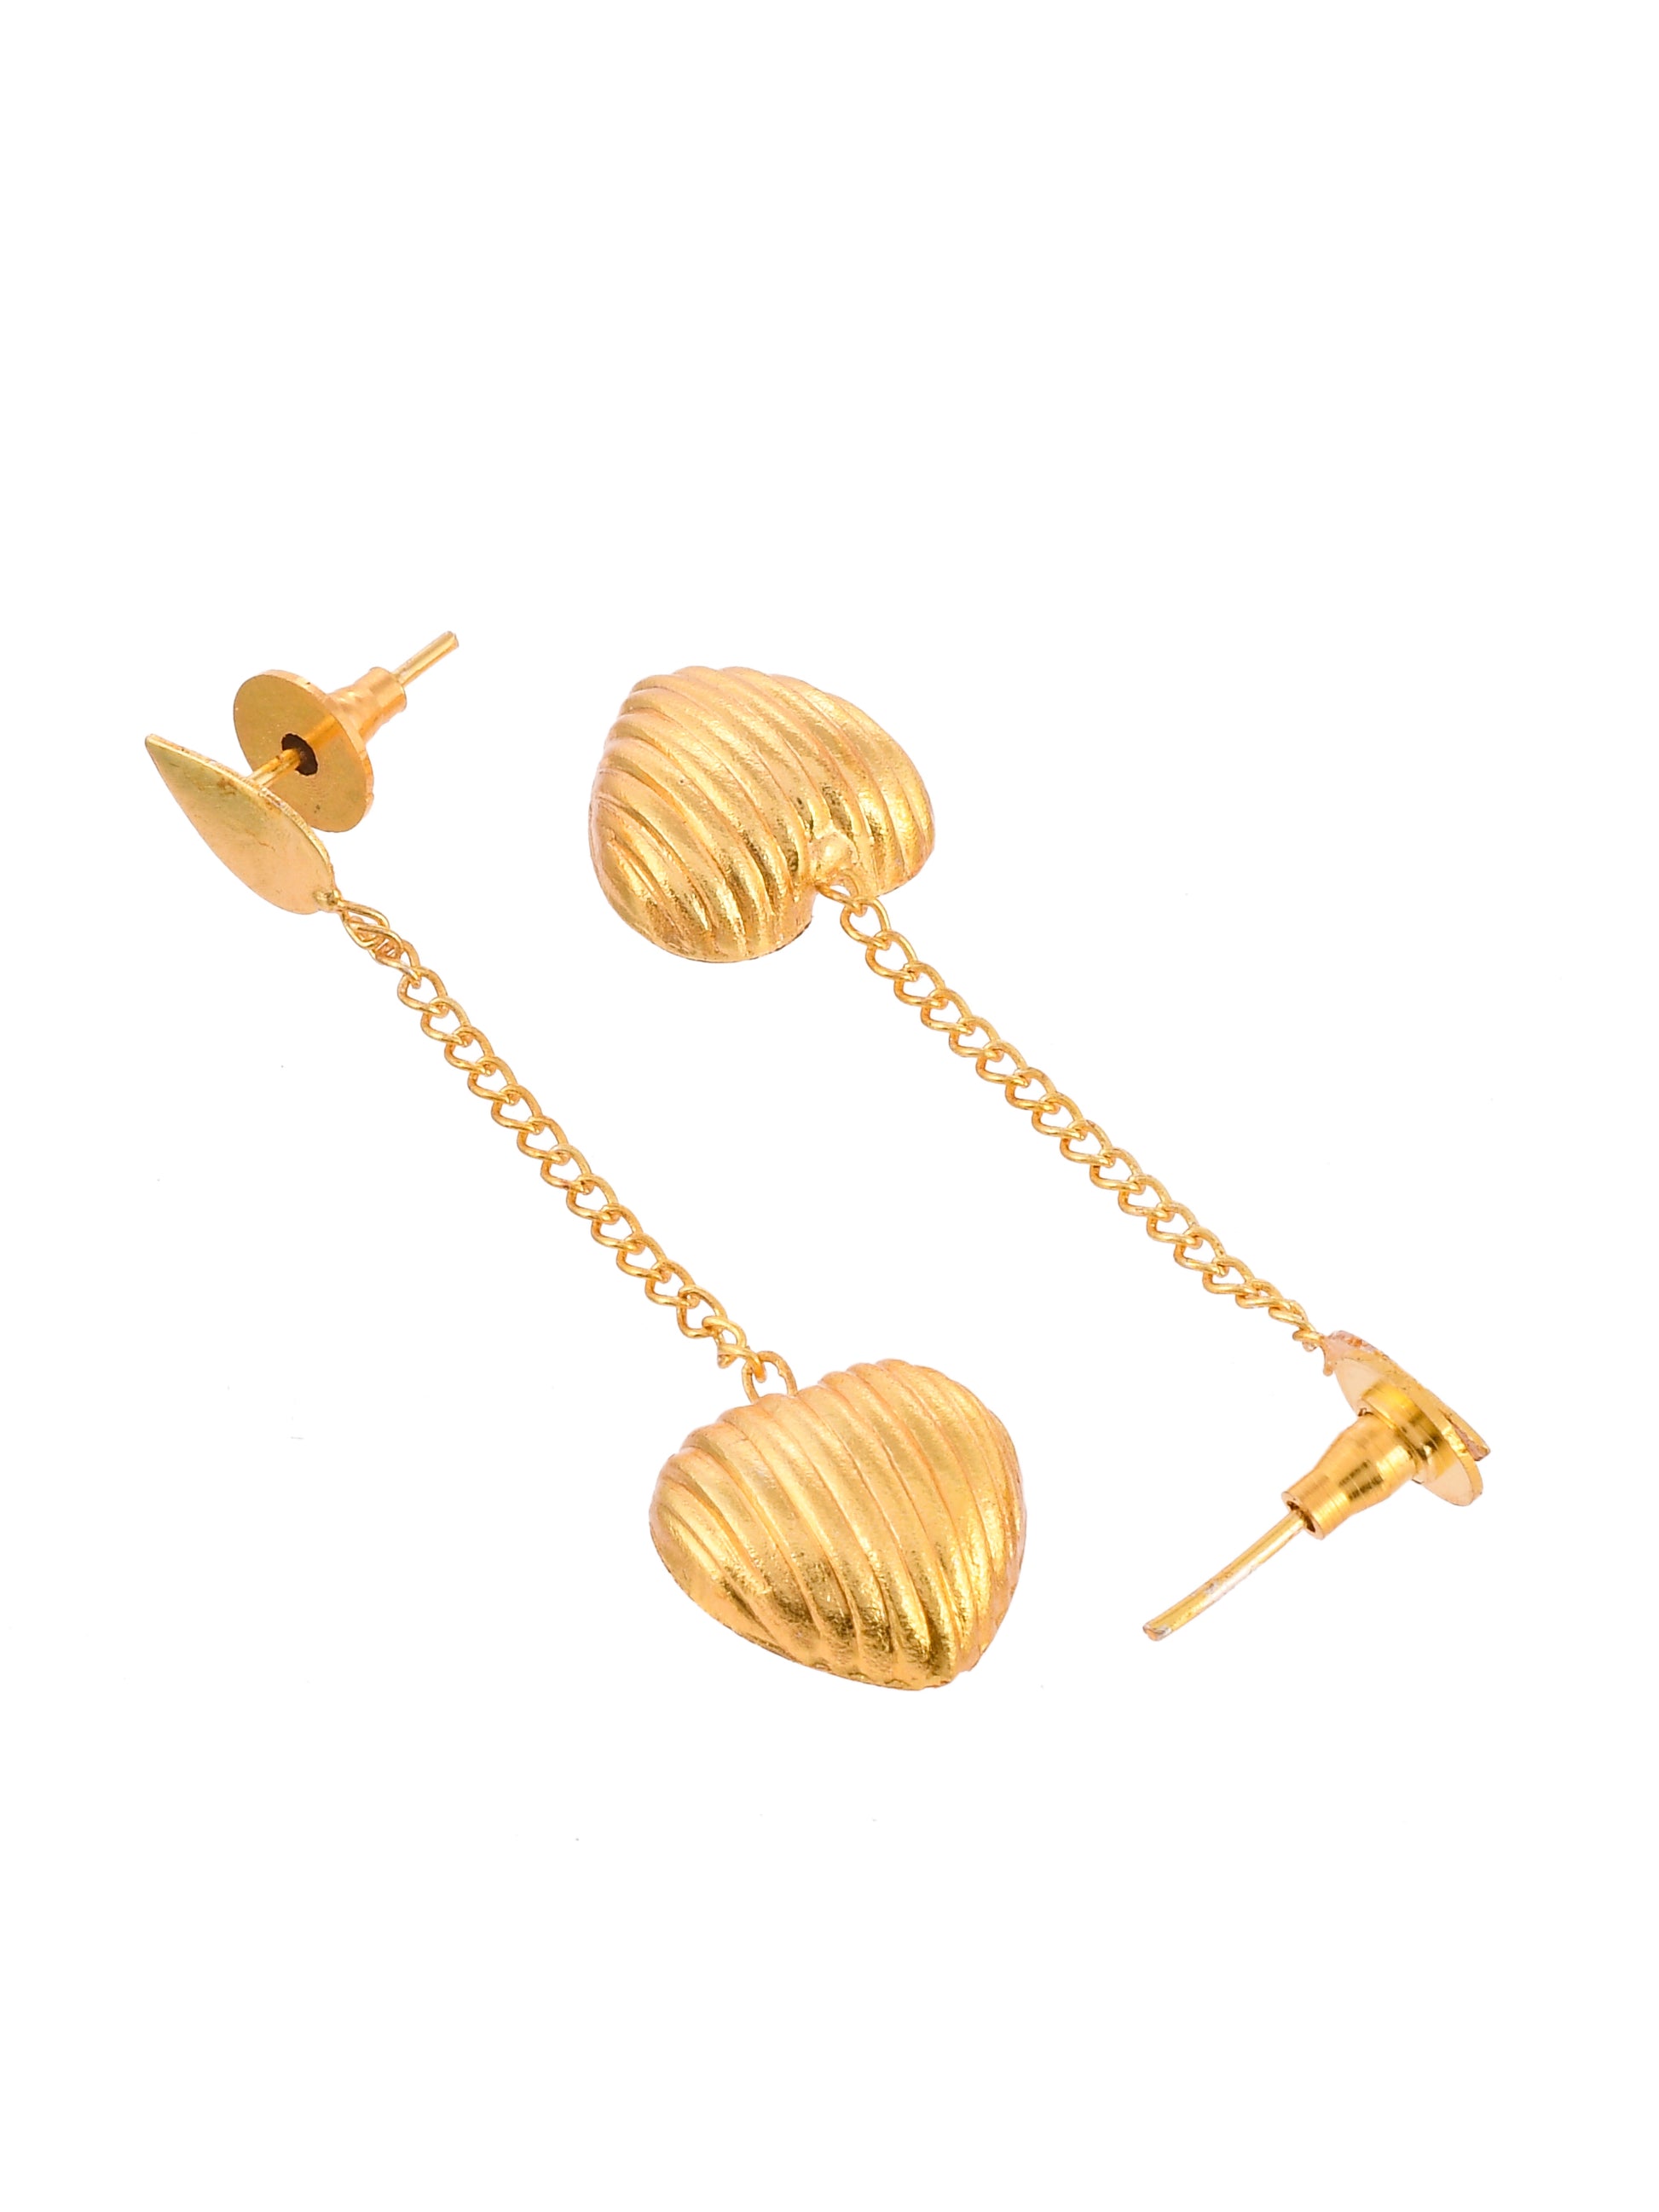 Gold Plated Handcrafted Heart Chain Earrings